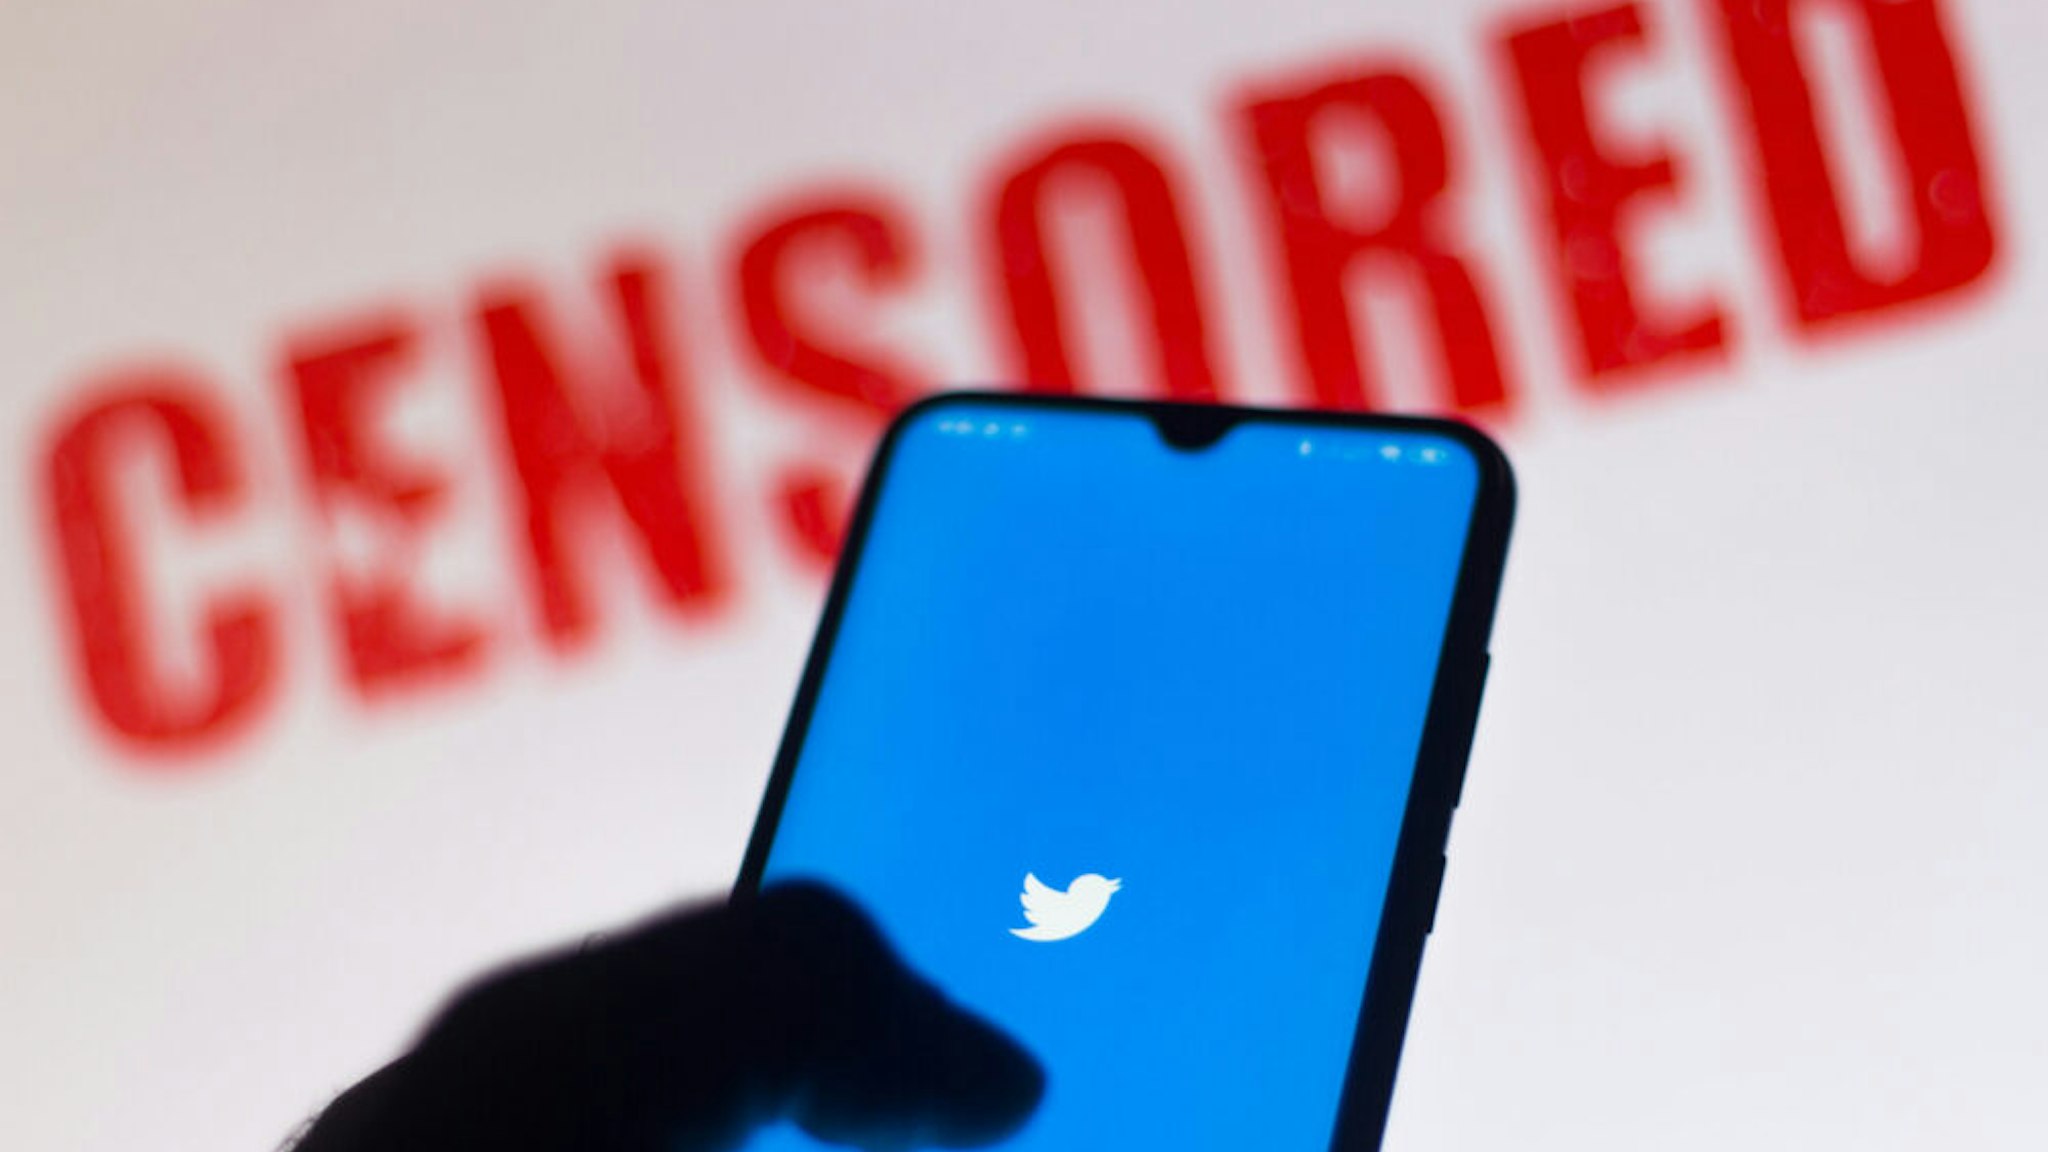 BRAZIL - 2020/06/15: In this photo illustration the Twitter logo is displayed on a smartphone and a red alerting word "CENSORED" on the blurred background.